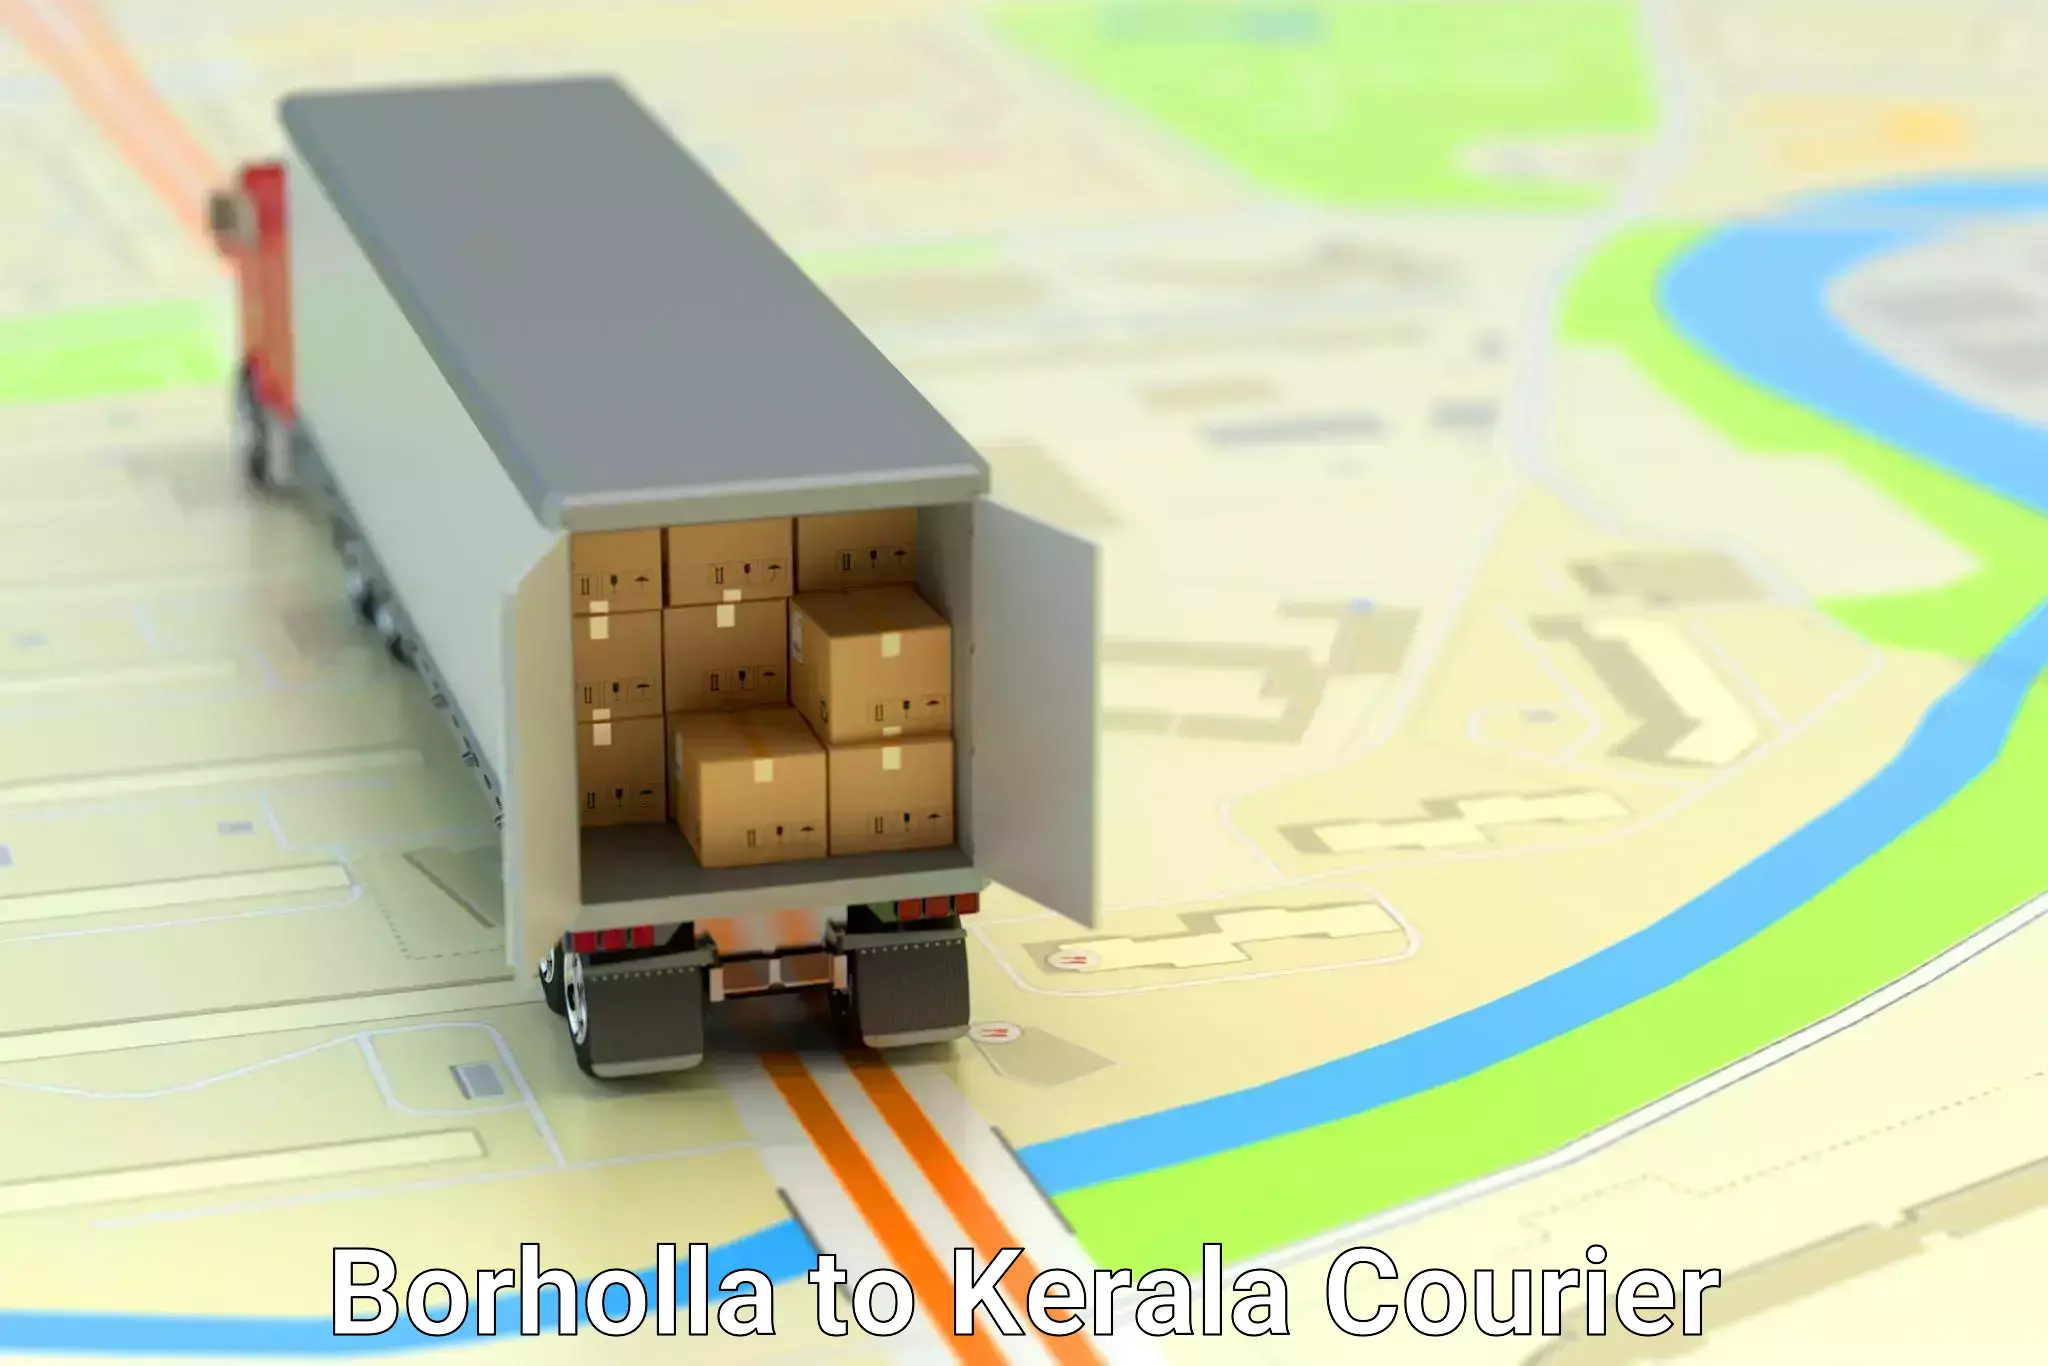 Package delivery network Borholla to Cochin